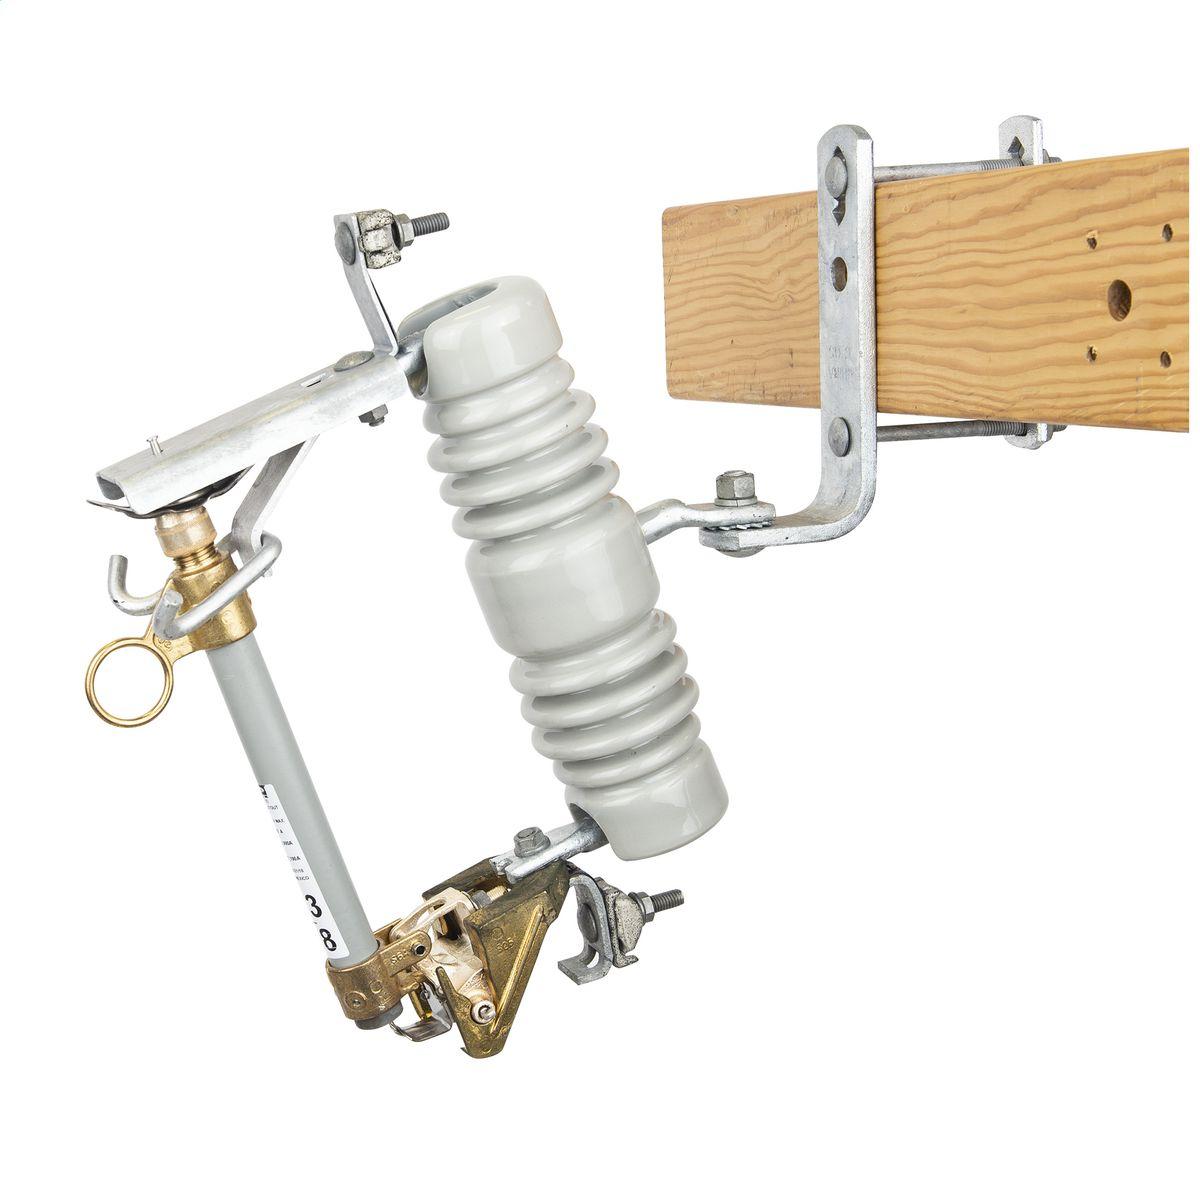 Hubbell C710333PDS 27 kV, 150 kV BIL, Standard Type C Porcelain Cutout with a 300A solid blade, parallel-groove connector and a D-shape pole mounting bracket. 